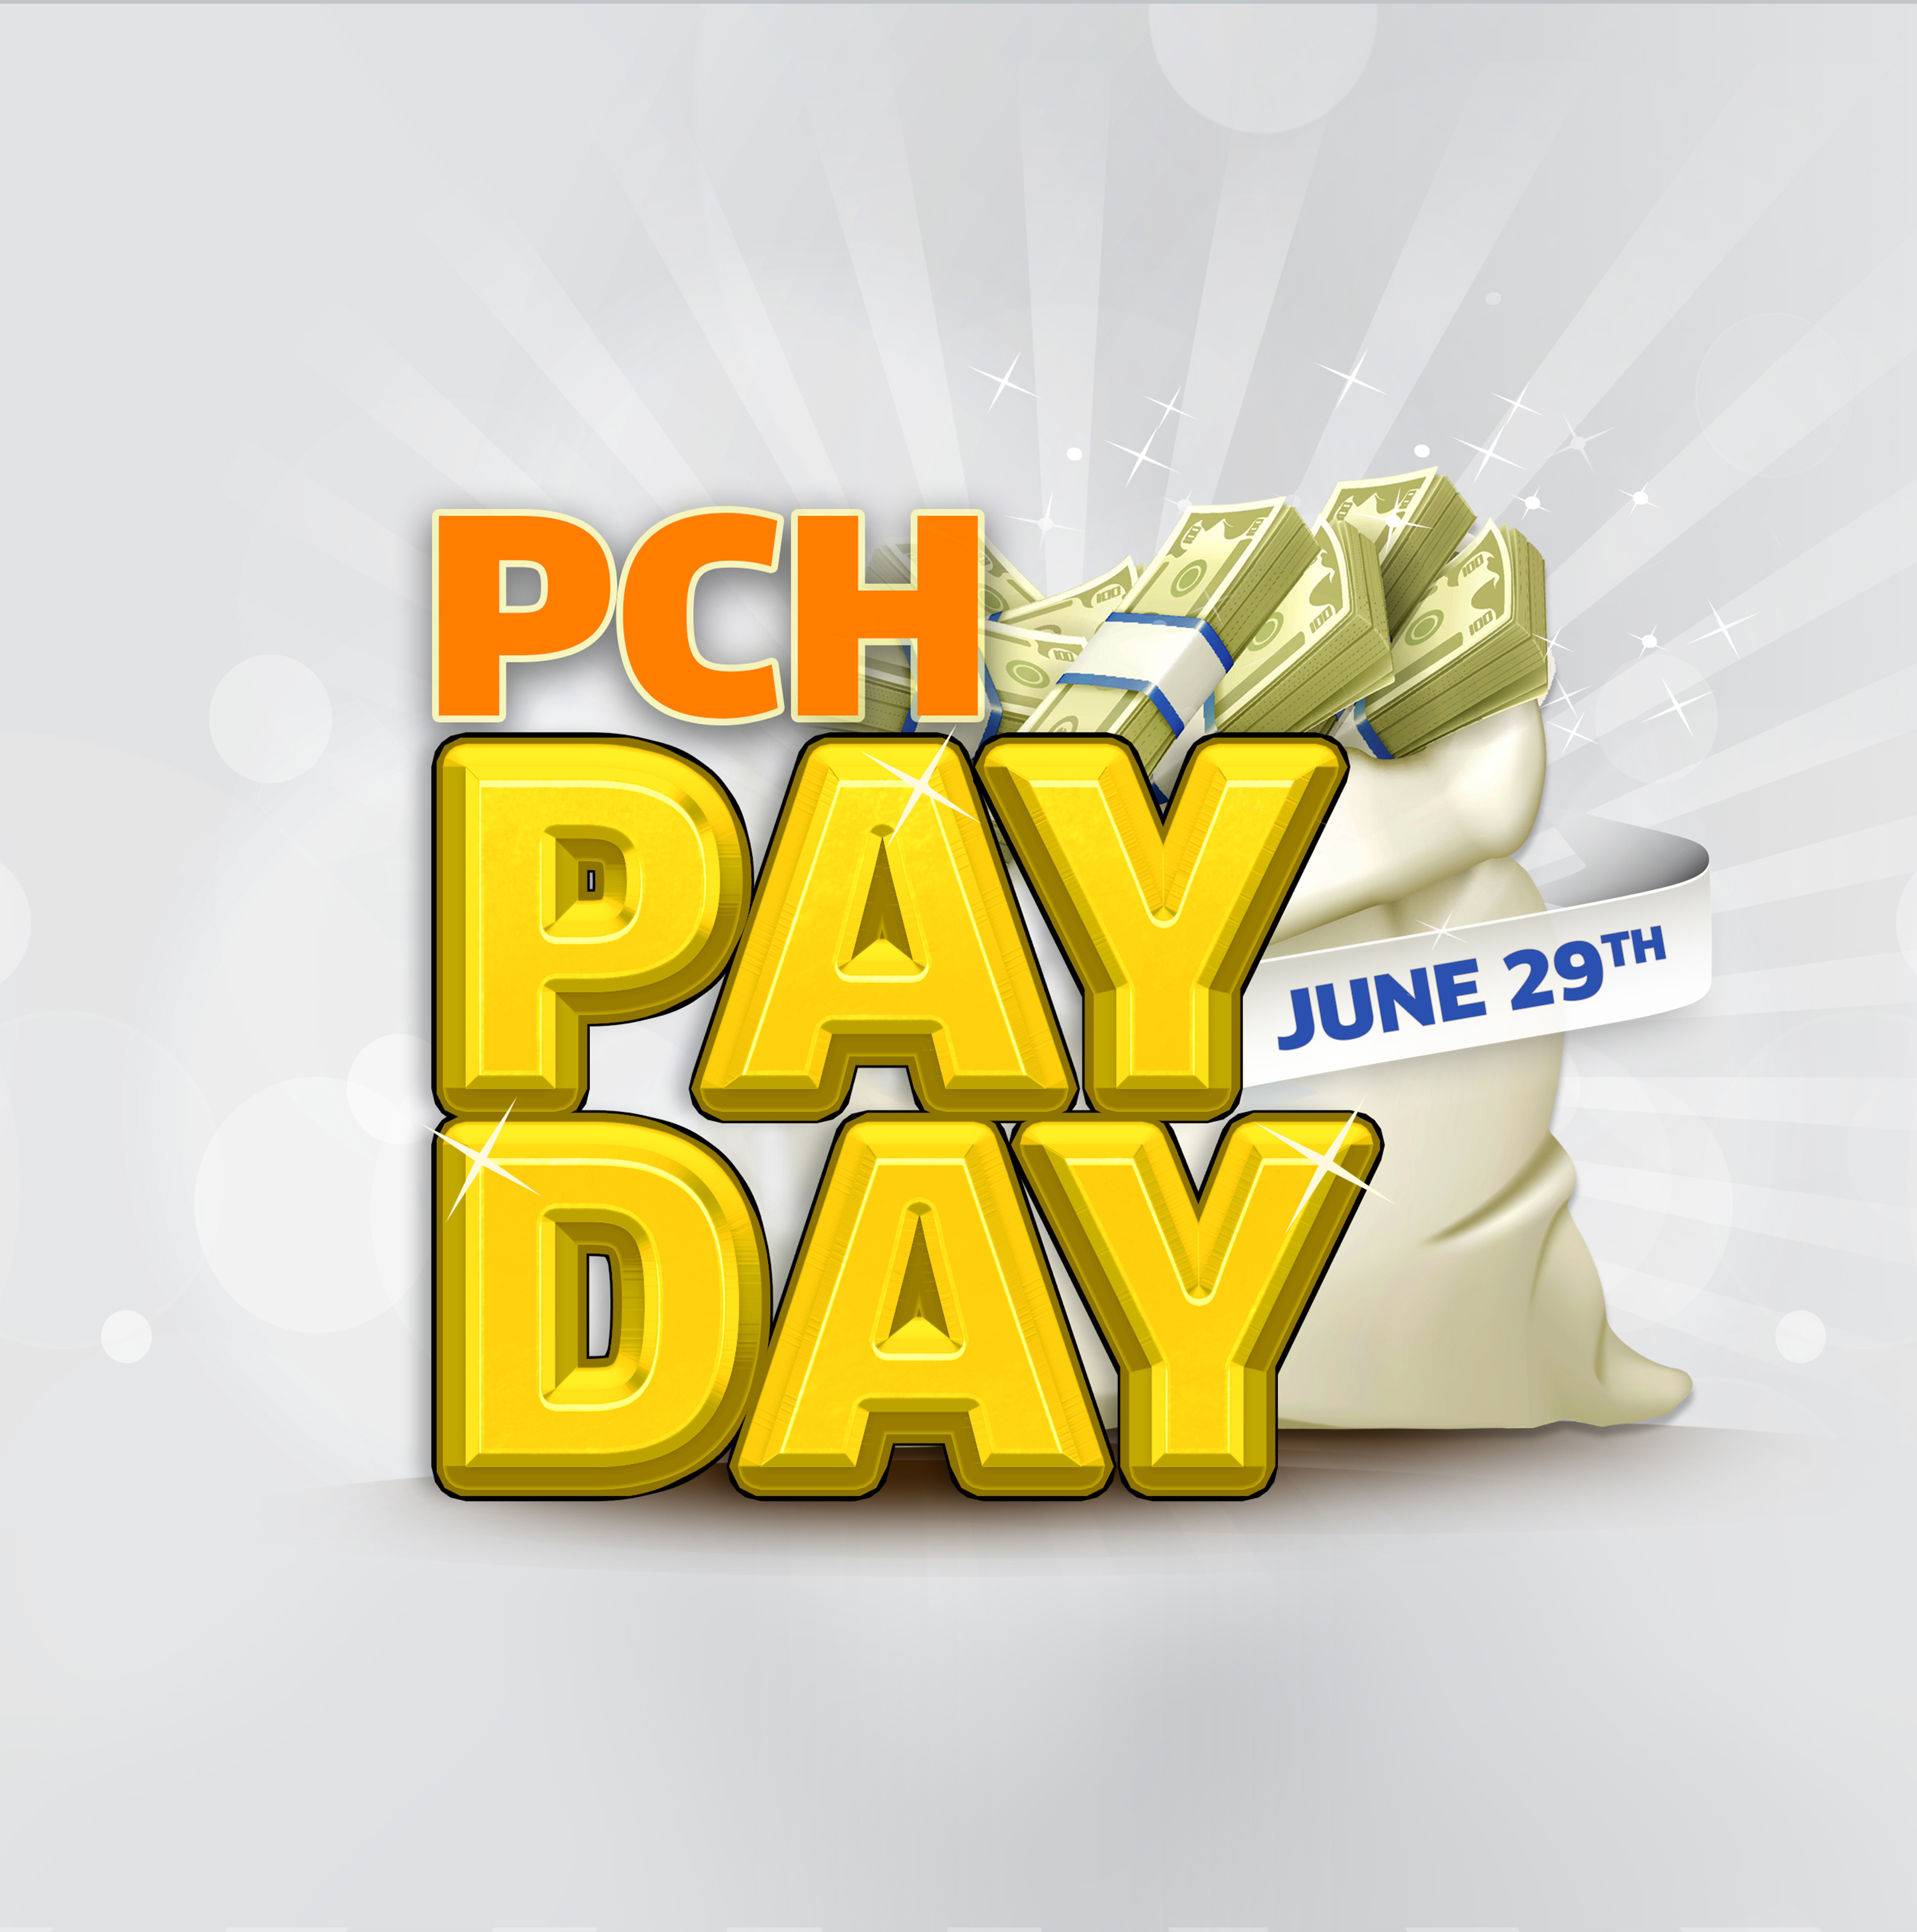 PCH Pay Day – June 29TH